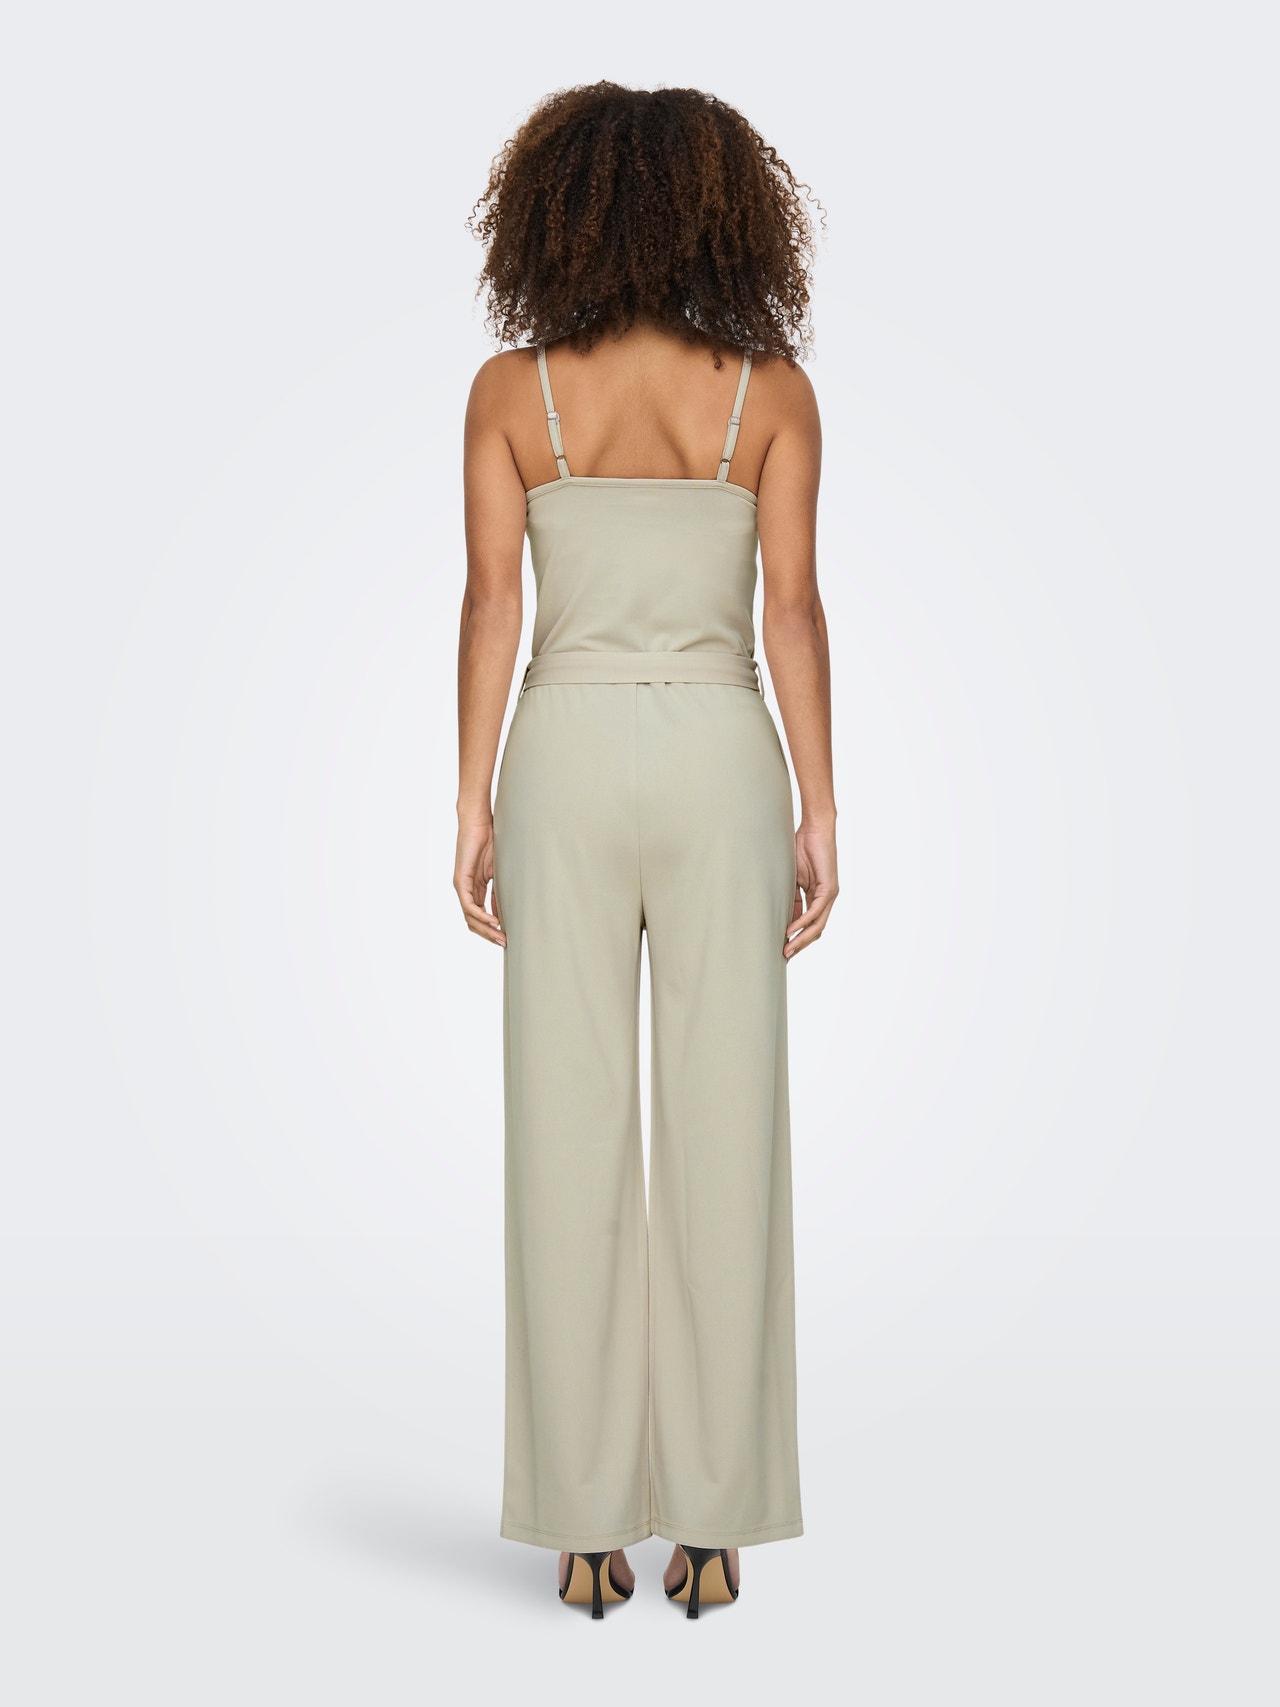 ONLY Jumpsuit med bælte -Chateau Gray - 15288246